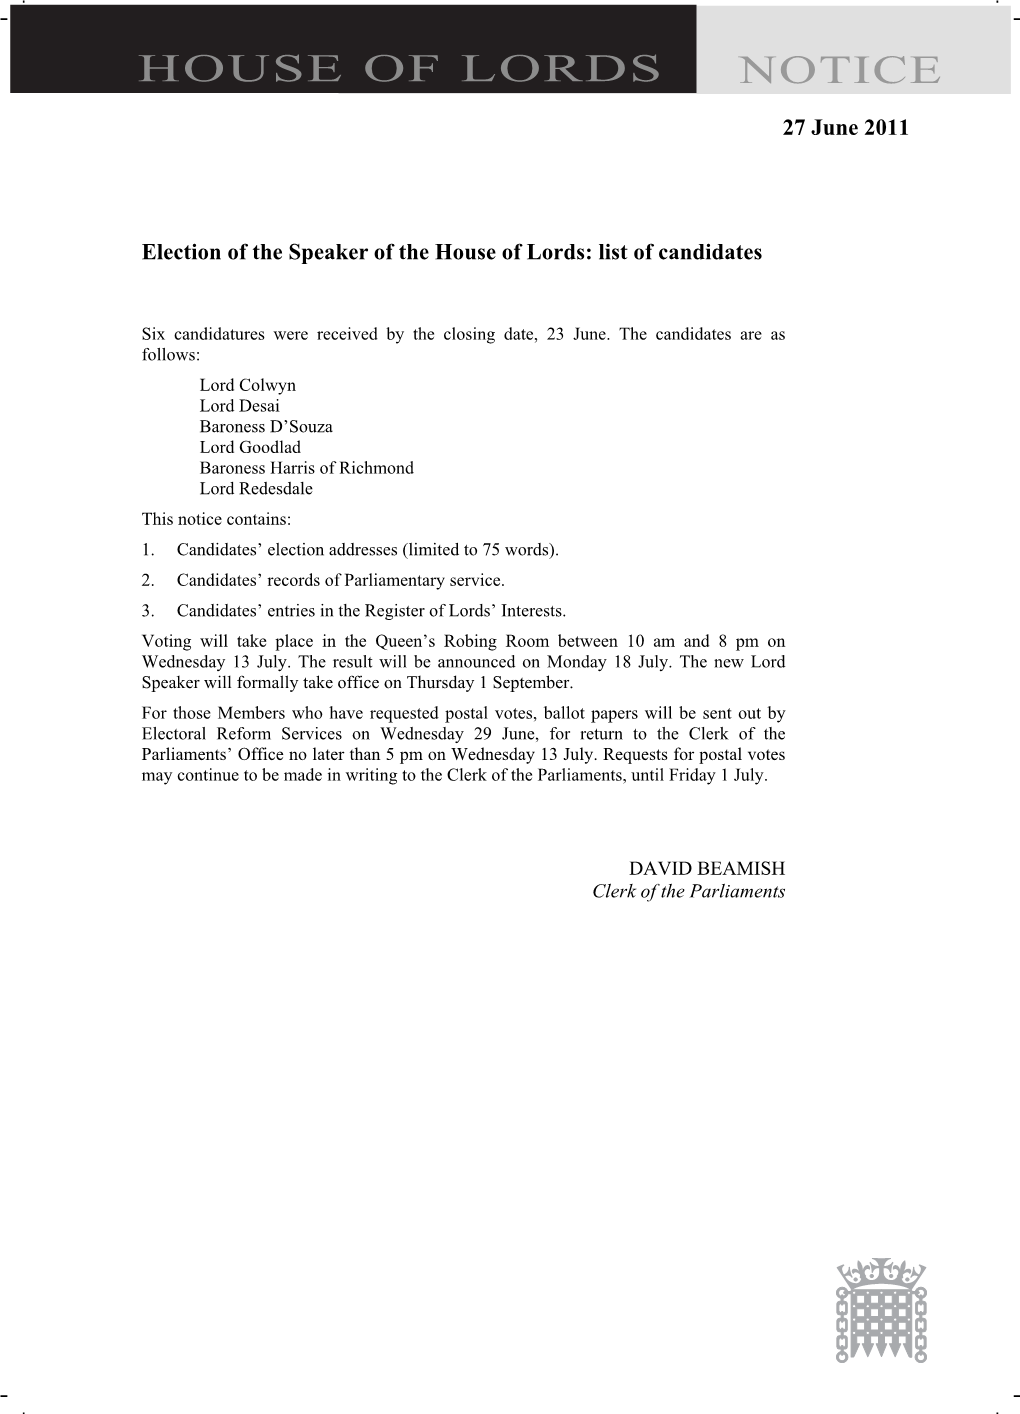 Election of the Speaker of the House of Lords: List of Candidates